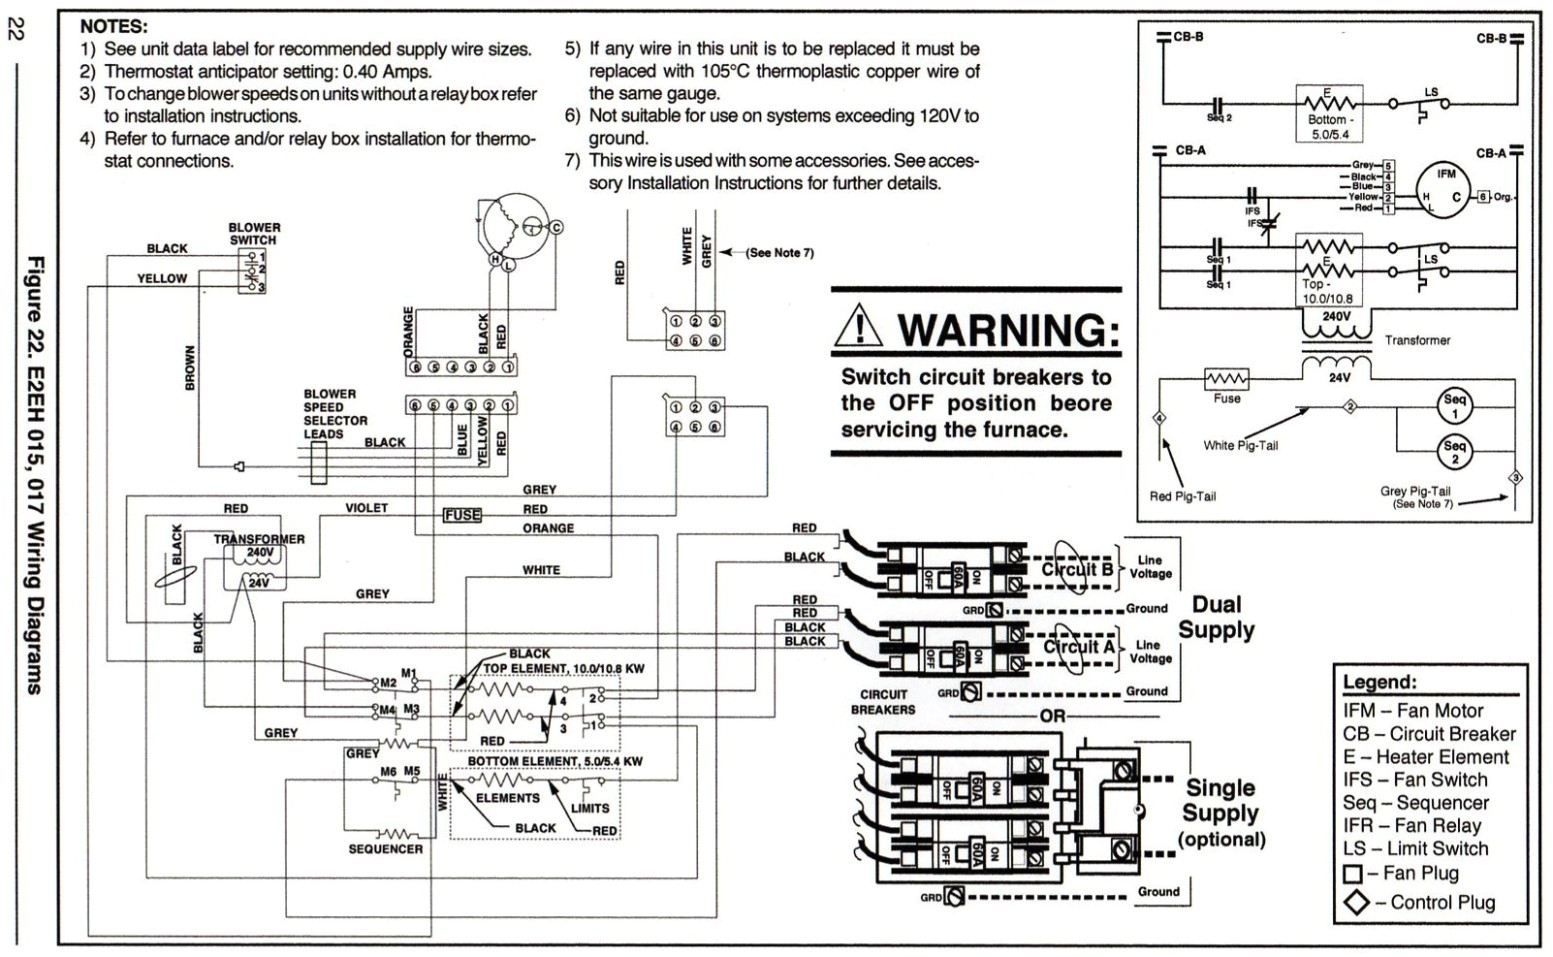 home furnace wiring wiring diagram article review wiring diagram further residential hvac system diagram as well nordyne